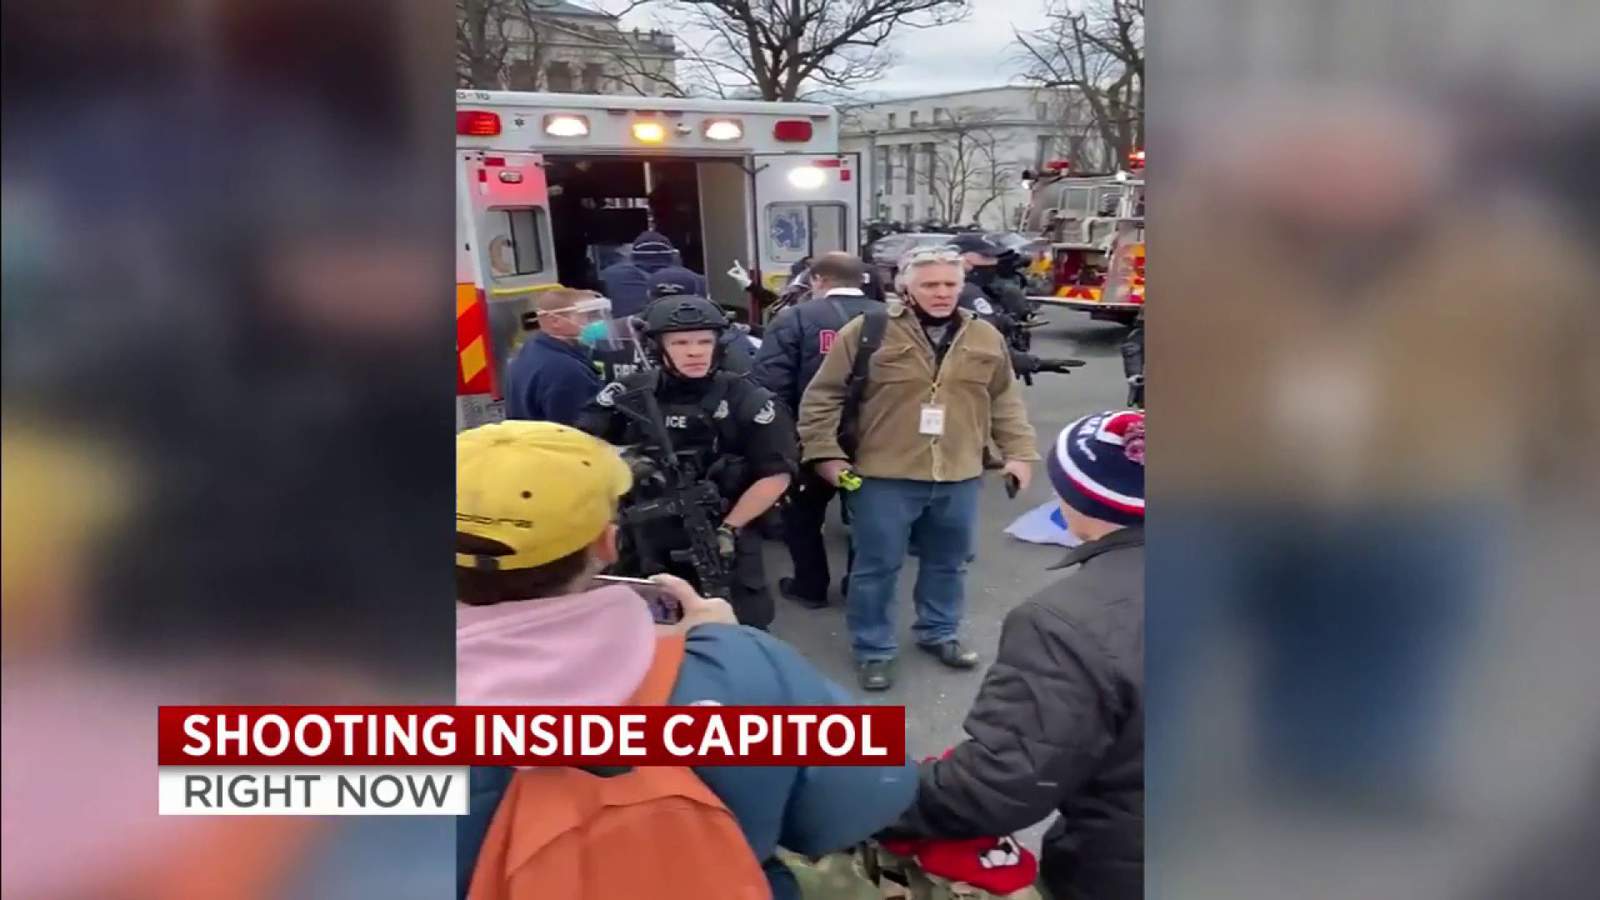 Woman shot inside Capitol during riot has died, AP reports